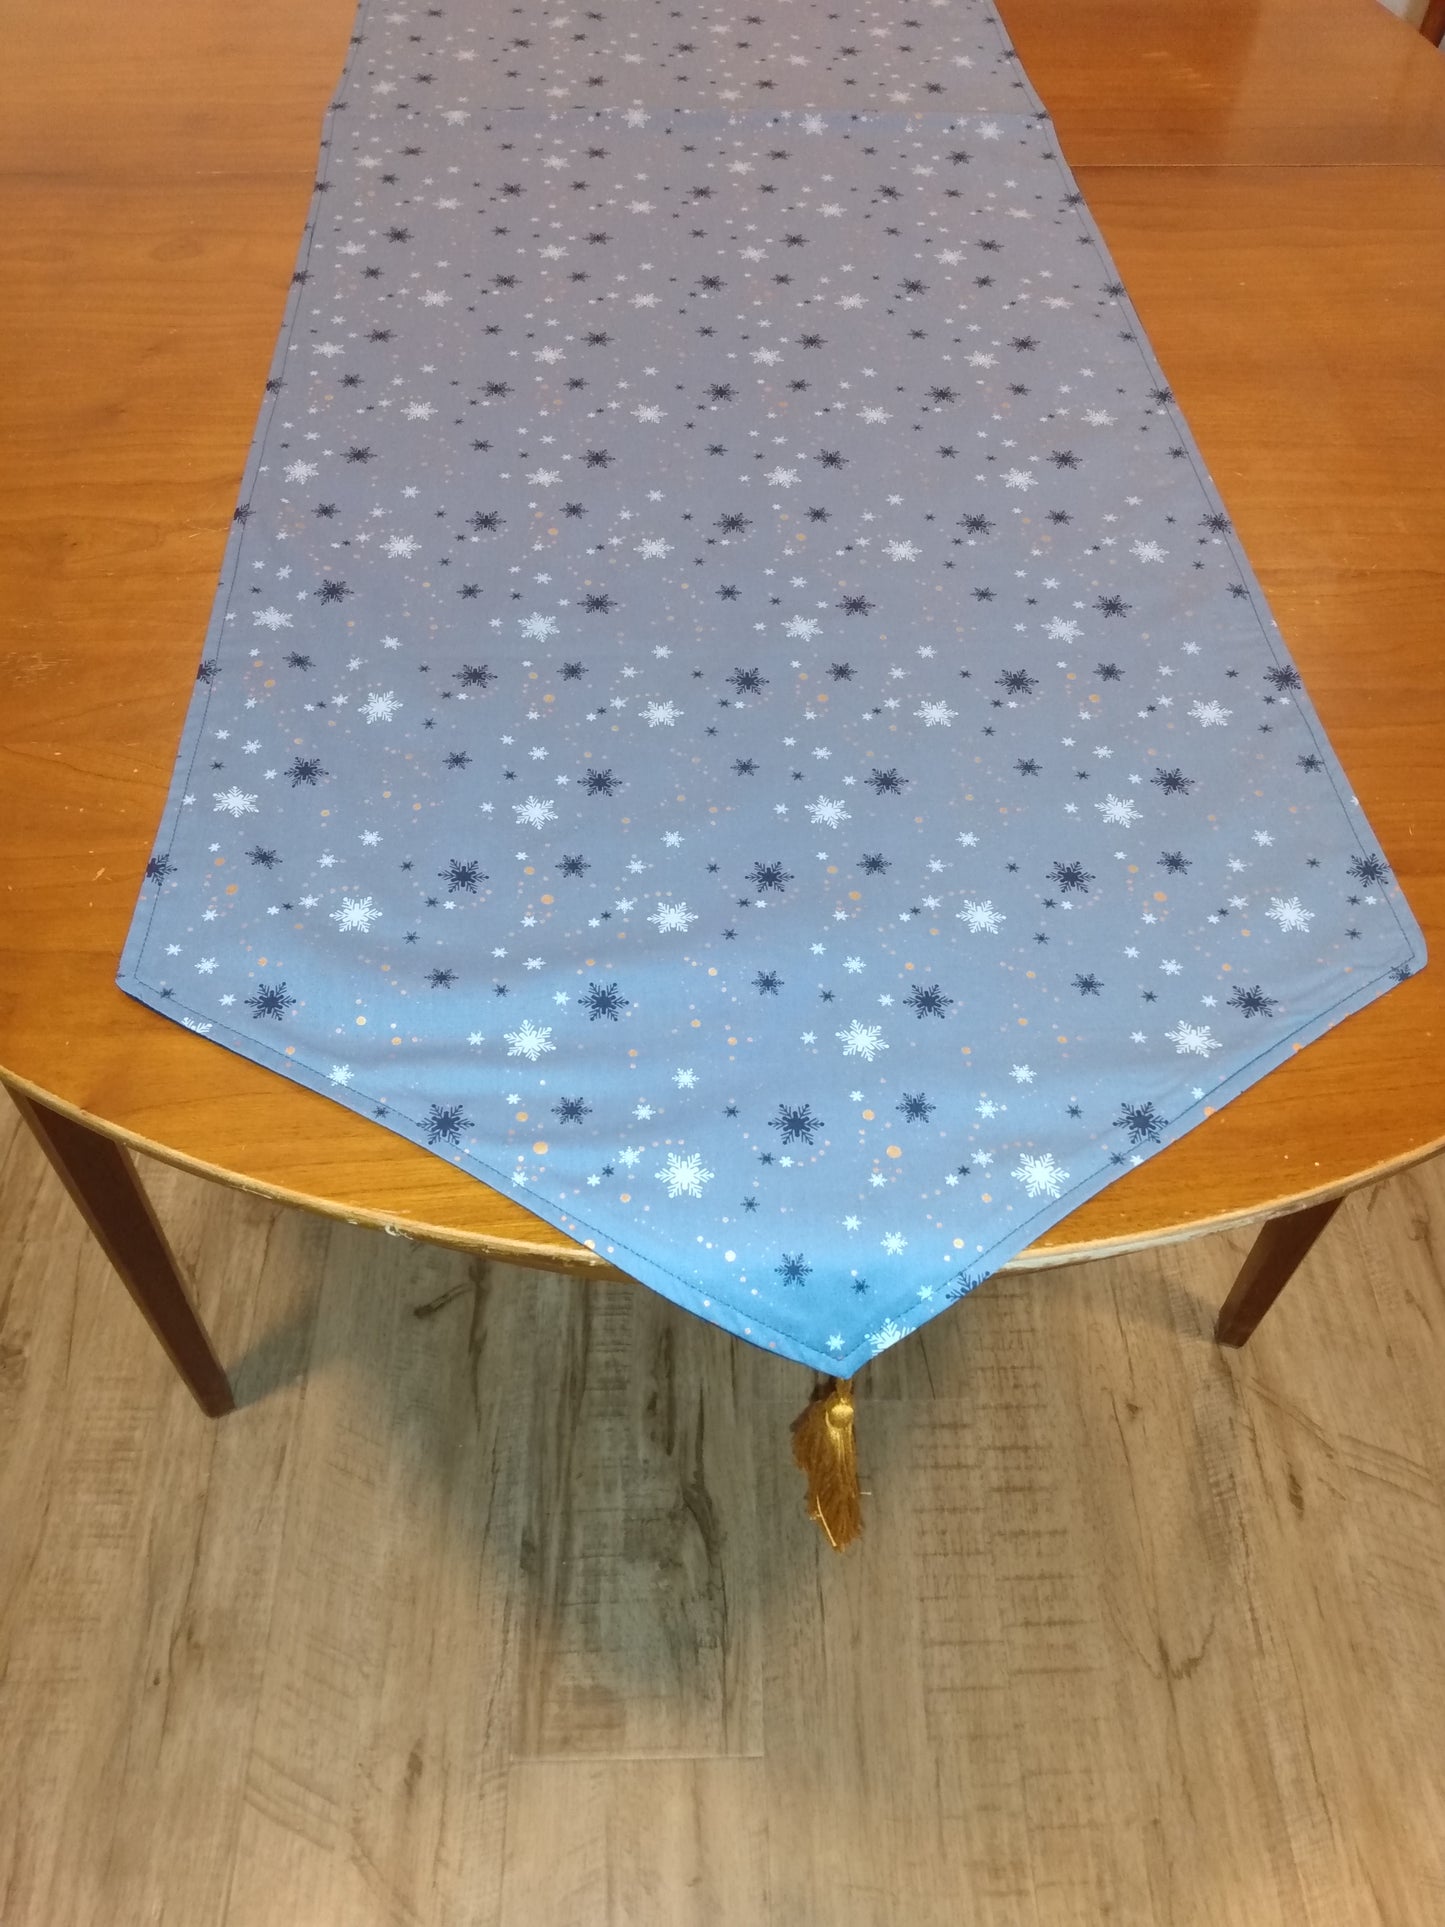 Table Runner 100% Cotton Navy Blue and White Snowflakes 72"